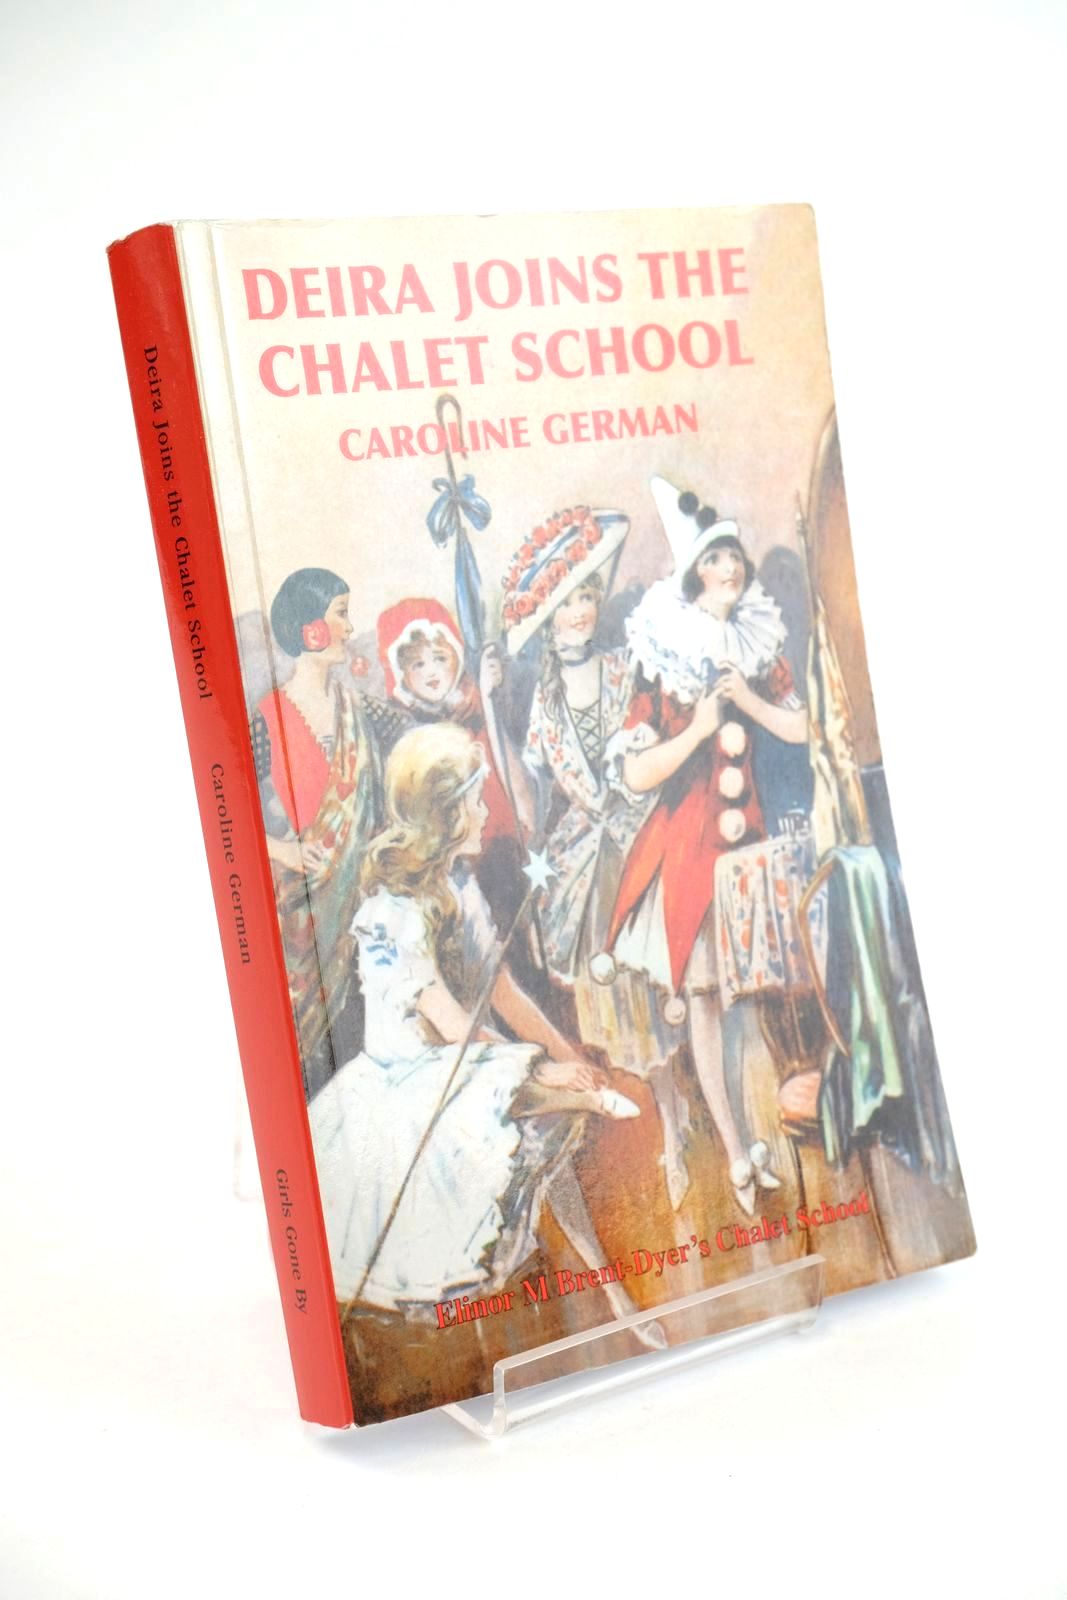 Photo of DEIRA JOINS THE CHALET SCHOOL written by Brent-Dyer, Elinor M. German, Caroline published by Girls Gone By (STOCK CODE: 1323997)  for sale by Stella & Rose's Books